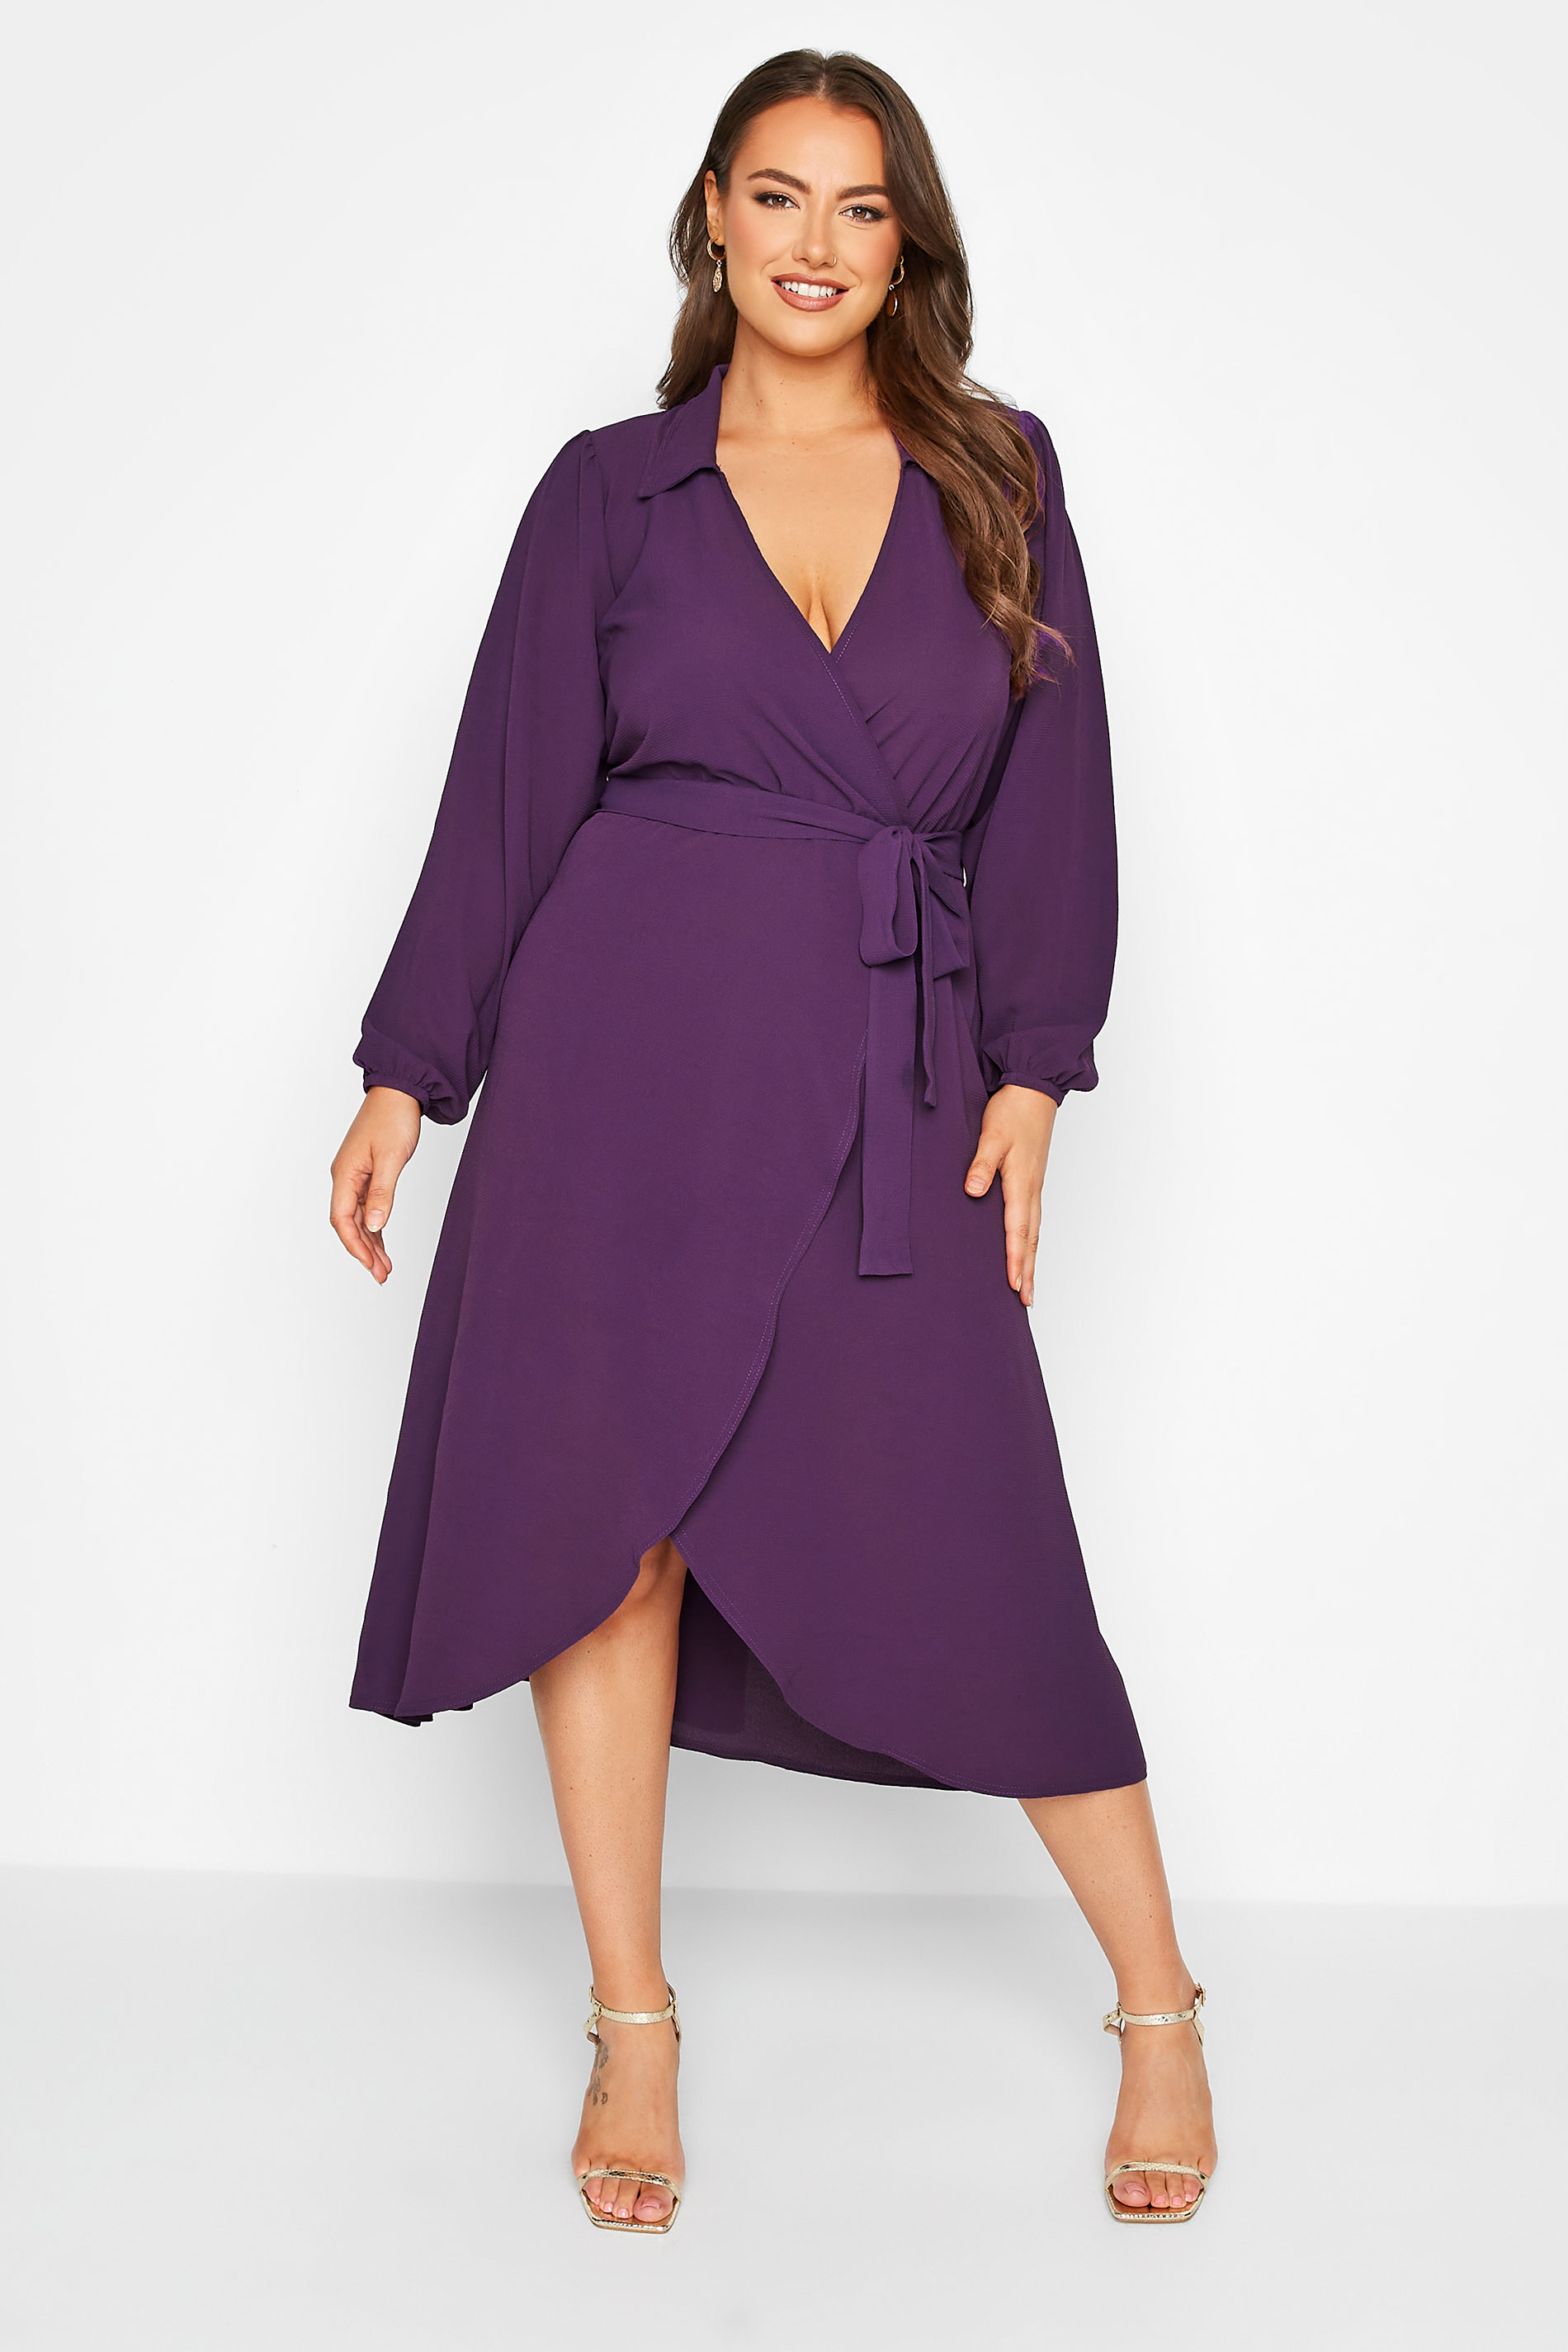 LIMITED COLLECTION Plus Size Purple Wrap Dress | Yours Clothing 2